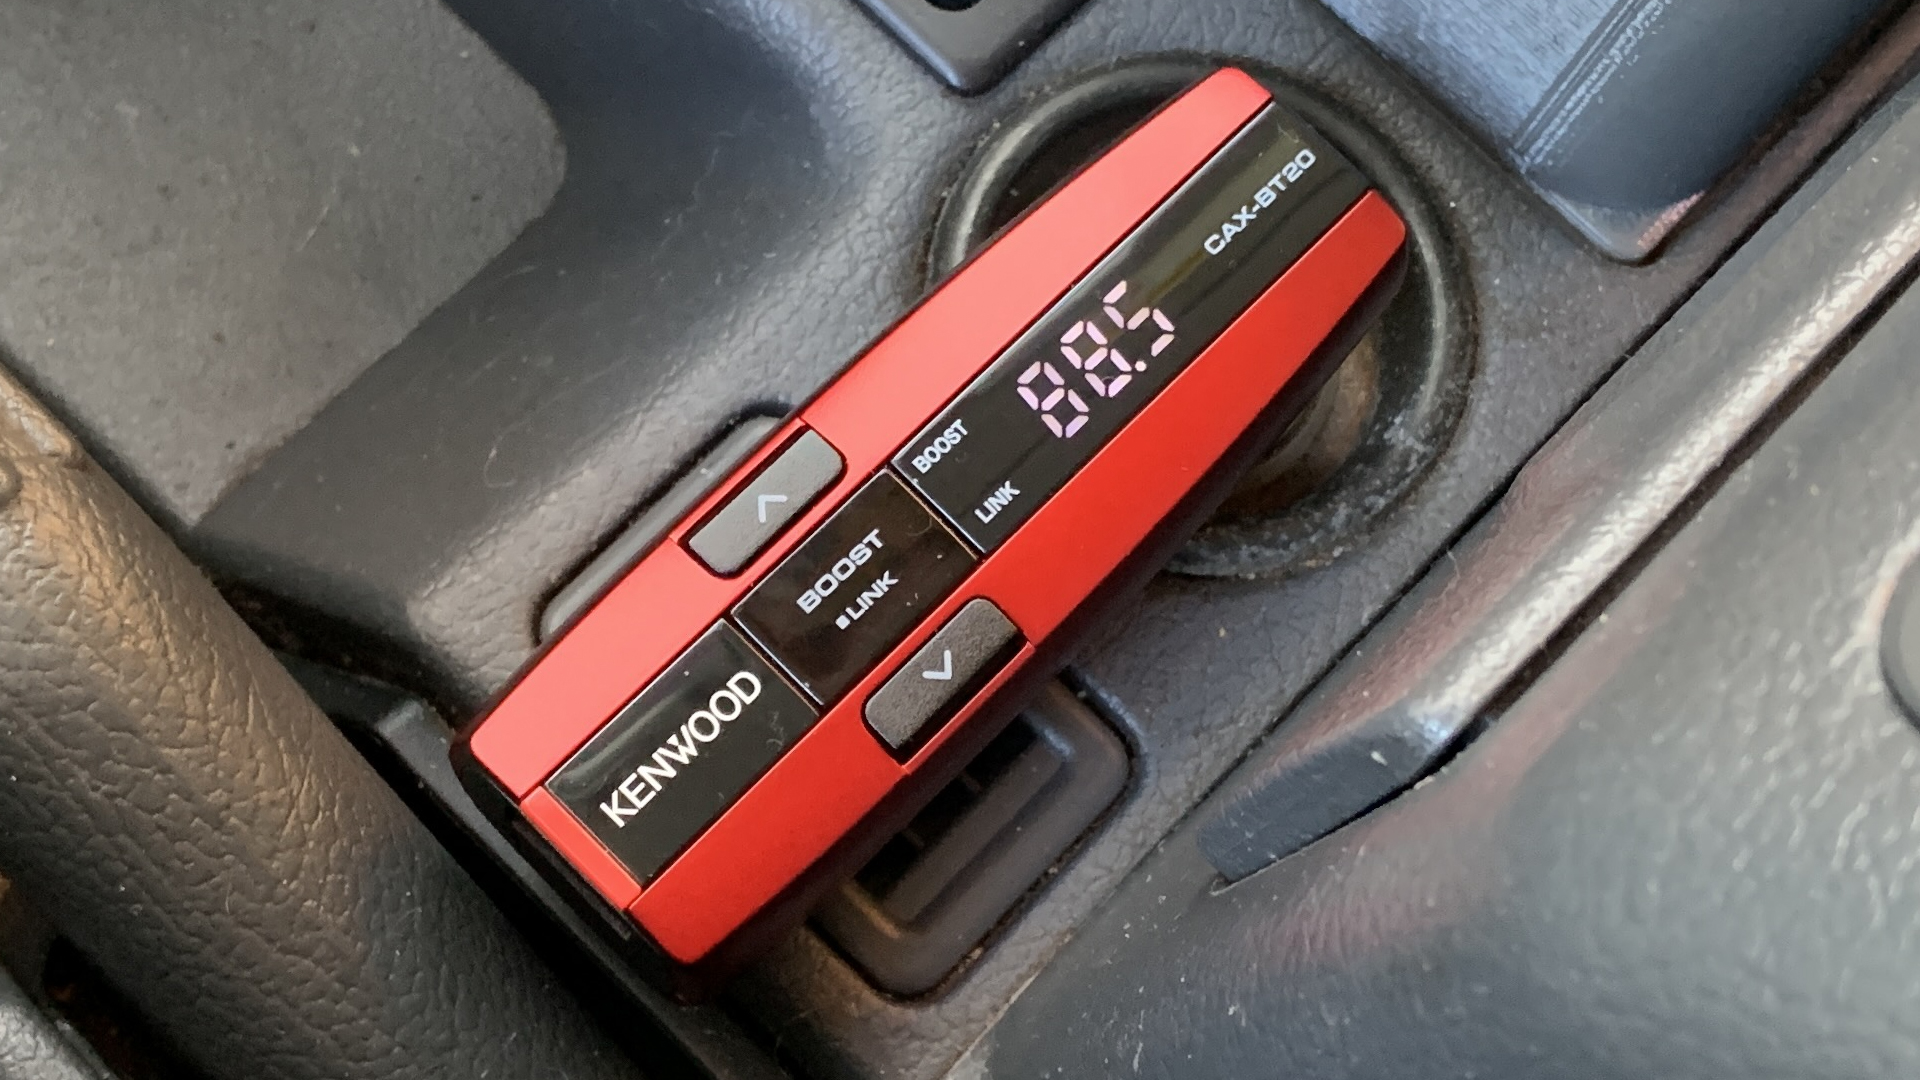 This Cool JDM Bluetooth Transmitter Taught Me an Expensive Lesson